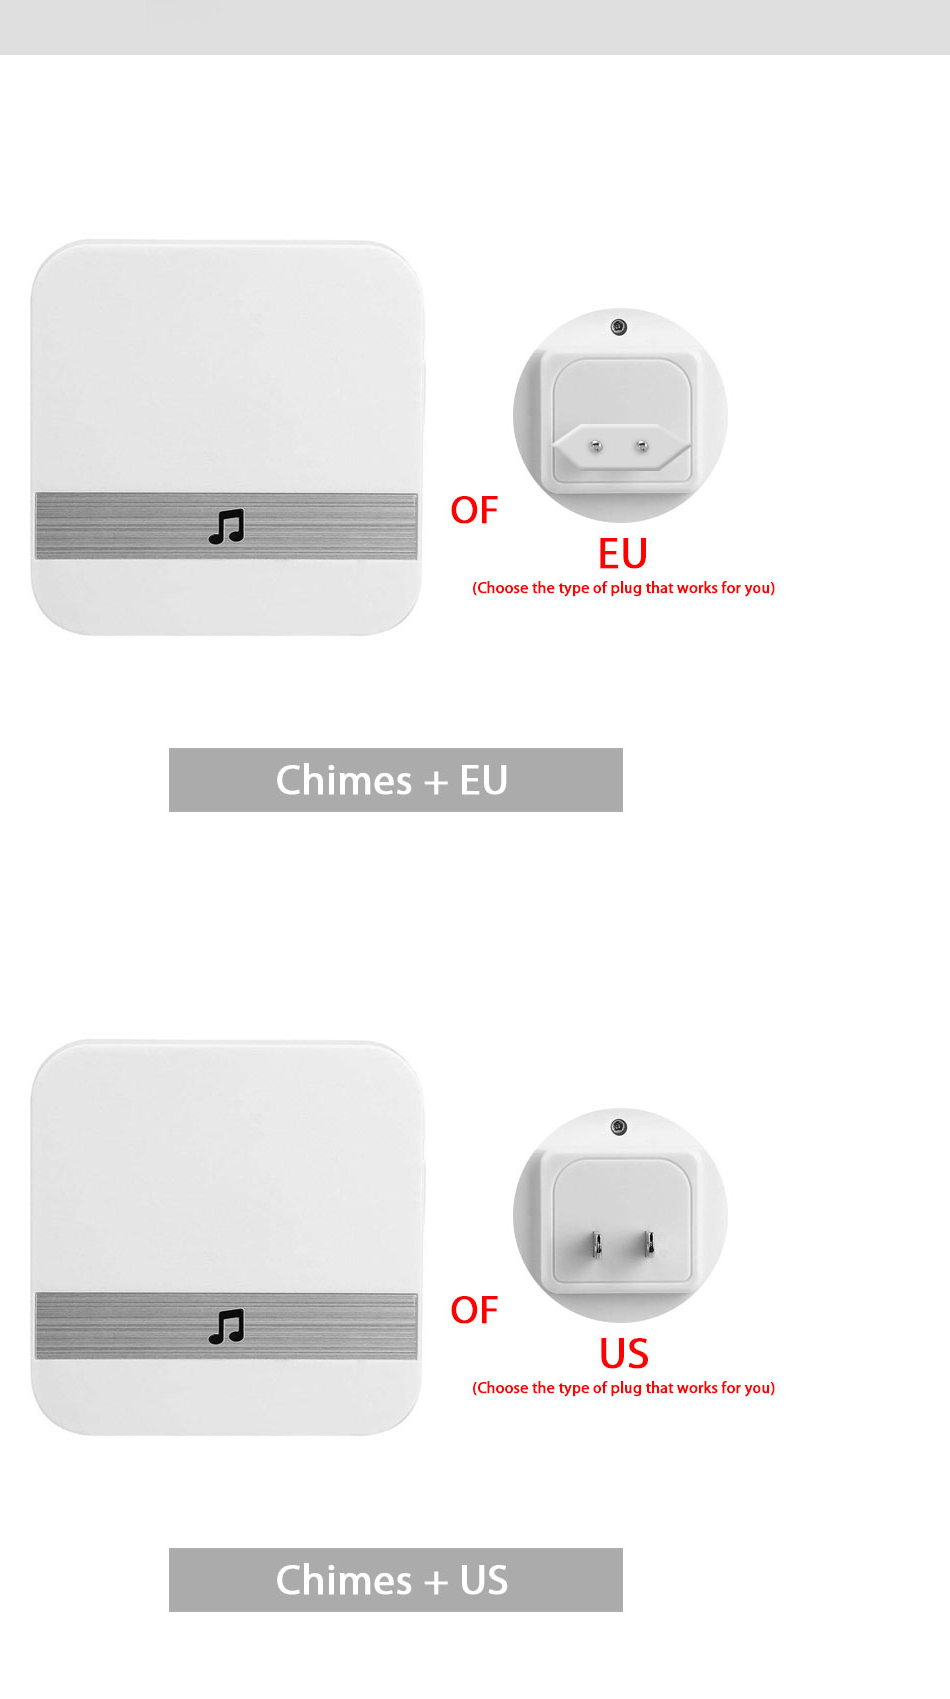 CH01 Chime Doorbell Receiver Ding Dong AC 90V-250V 52 Chimes 110dB Wifi Video Doorbell Camera Low Power Consumption Indoor Bell